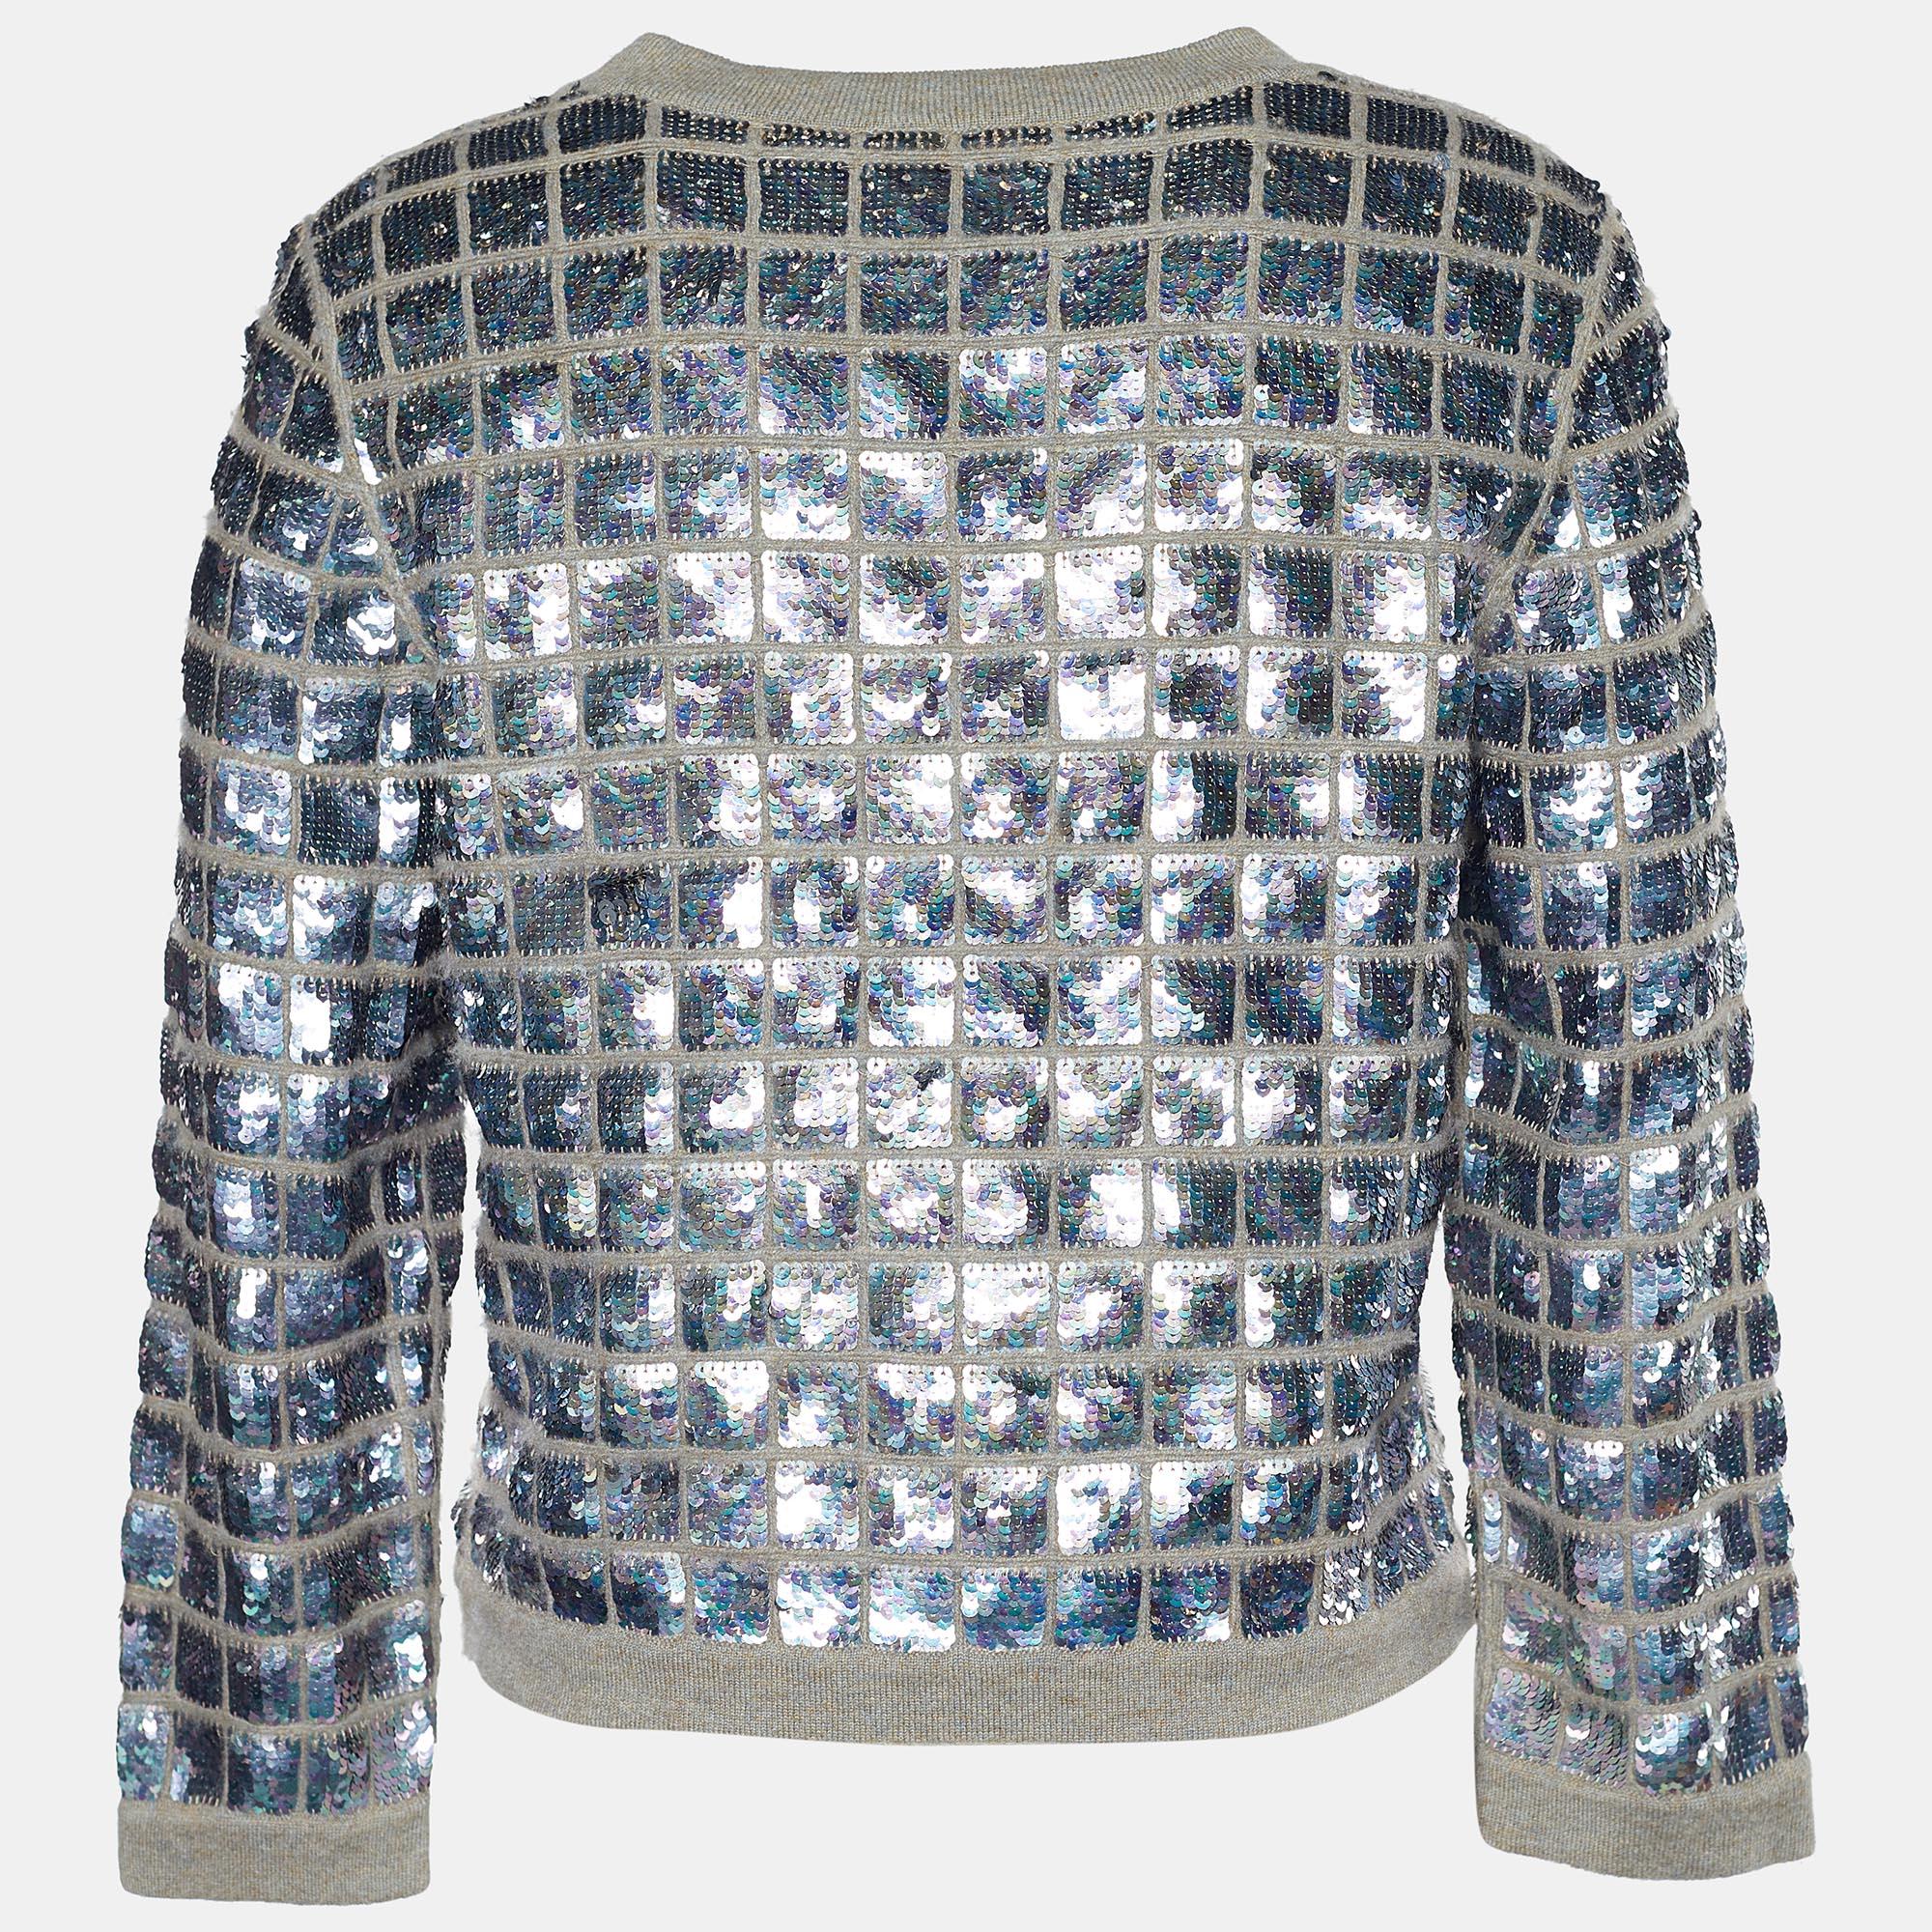 Let nothing dim your light and style, ever. With this cardigan from the House of Chanel, glamor comes easy. Tailored from beige-grey cashmere fabric, this cardigan is lit up with sequined grids, a button-front feature, and long sleeves. Buy this